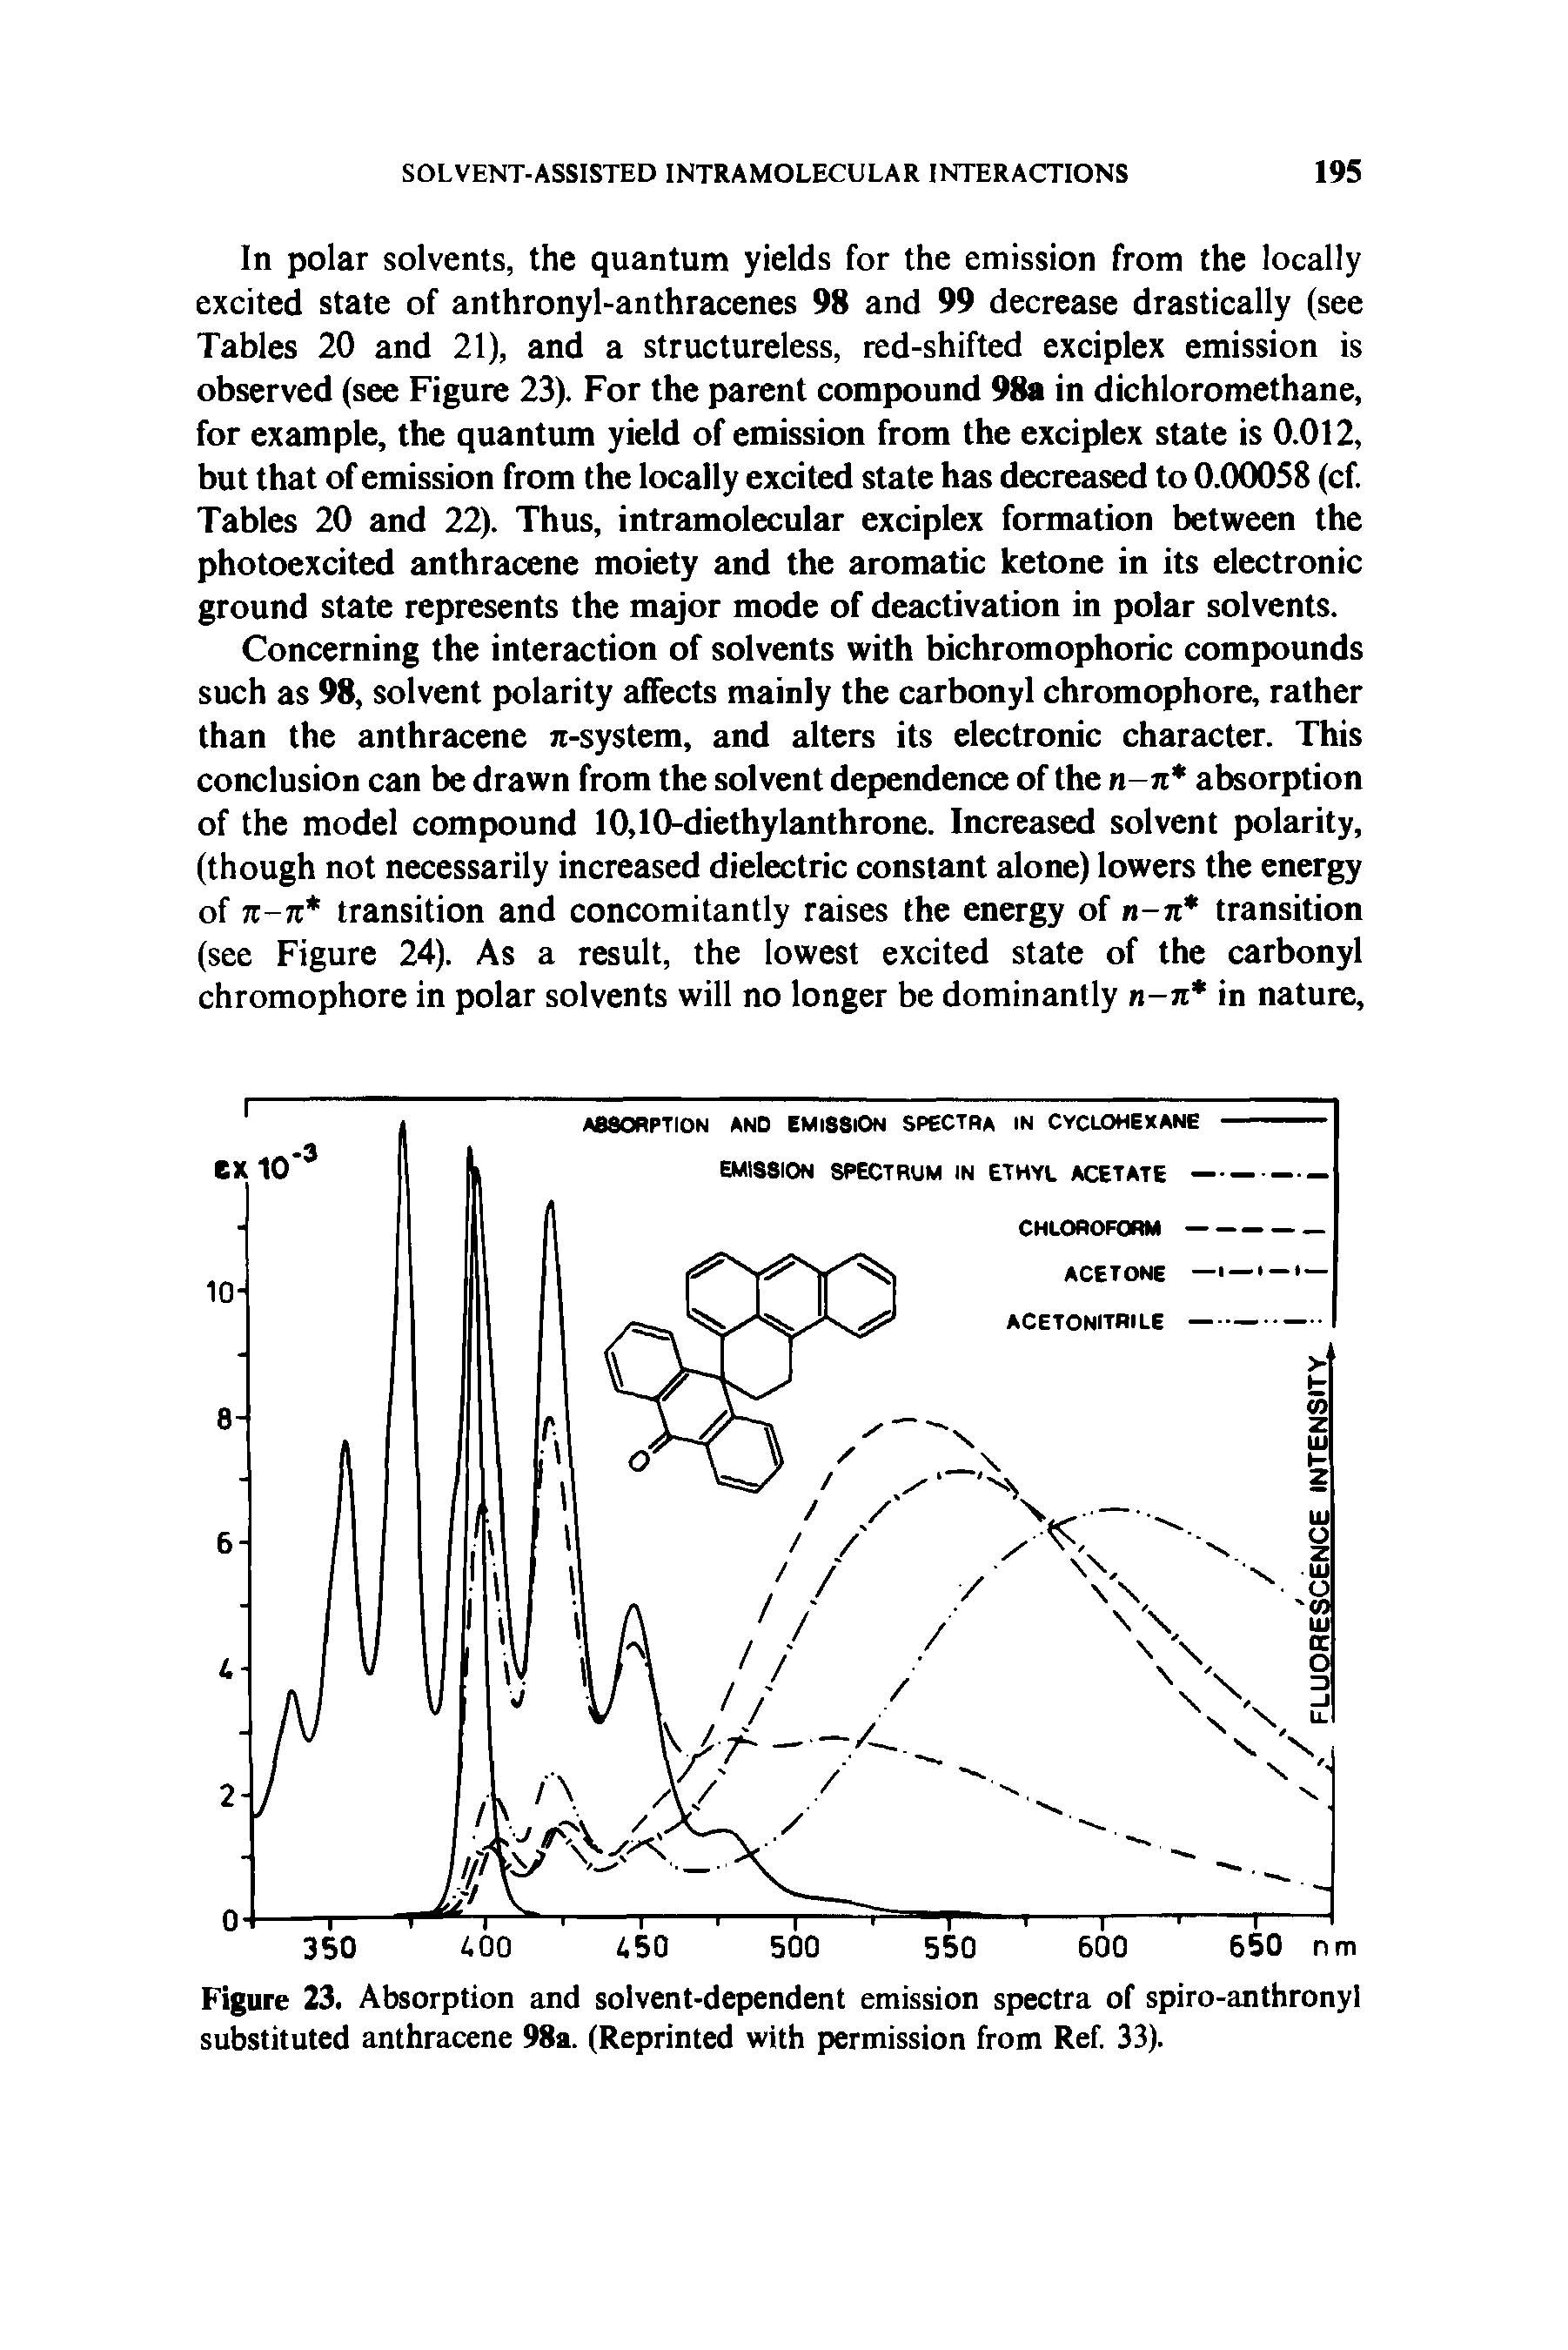 Figure 23. Absorption and solvent-dependent emission spectra of spiro-anthronyl substituted anthracene 98a. (Reprinted with permission from Ref. 33).